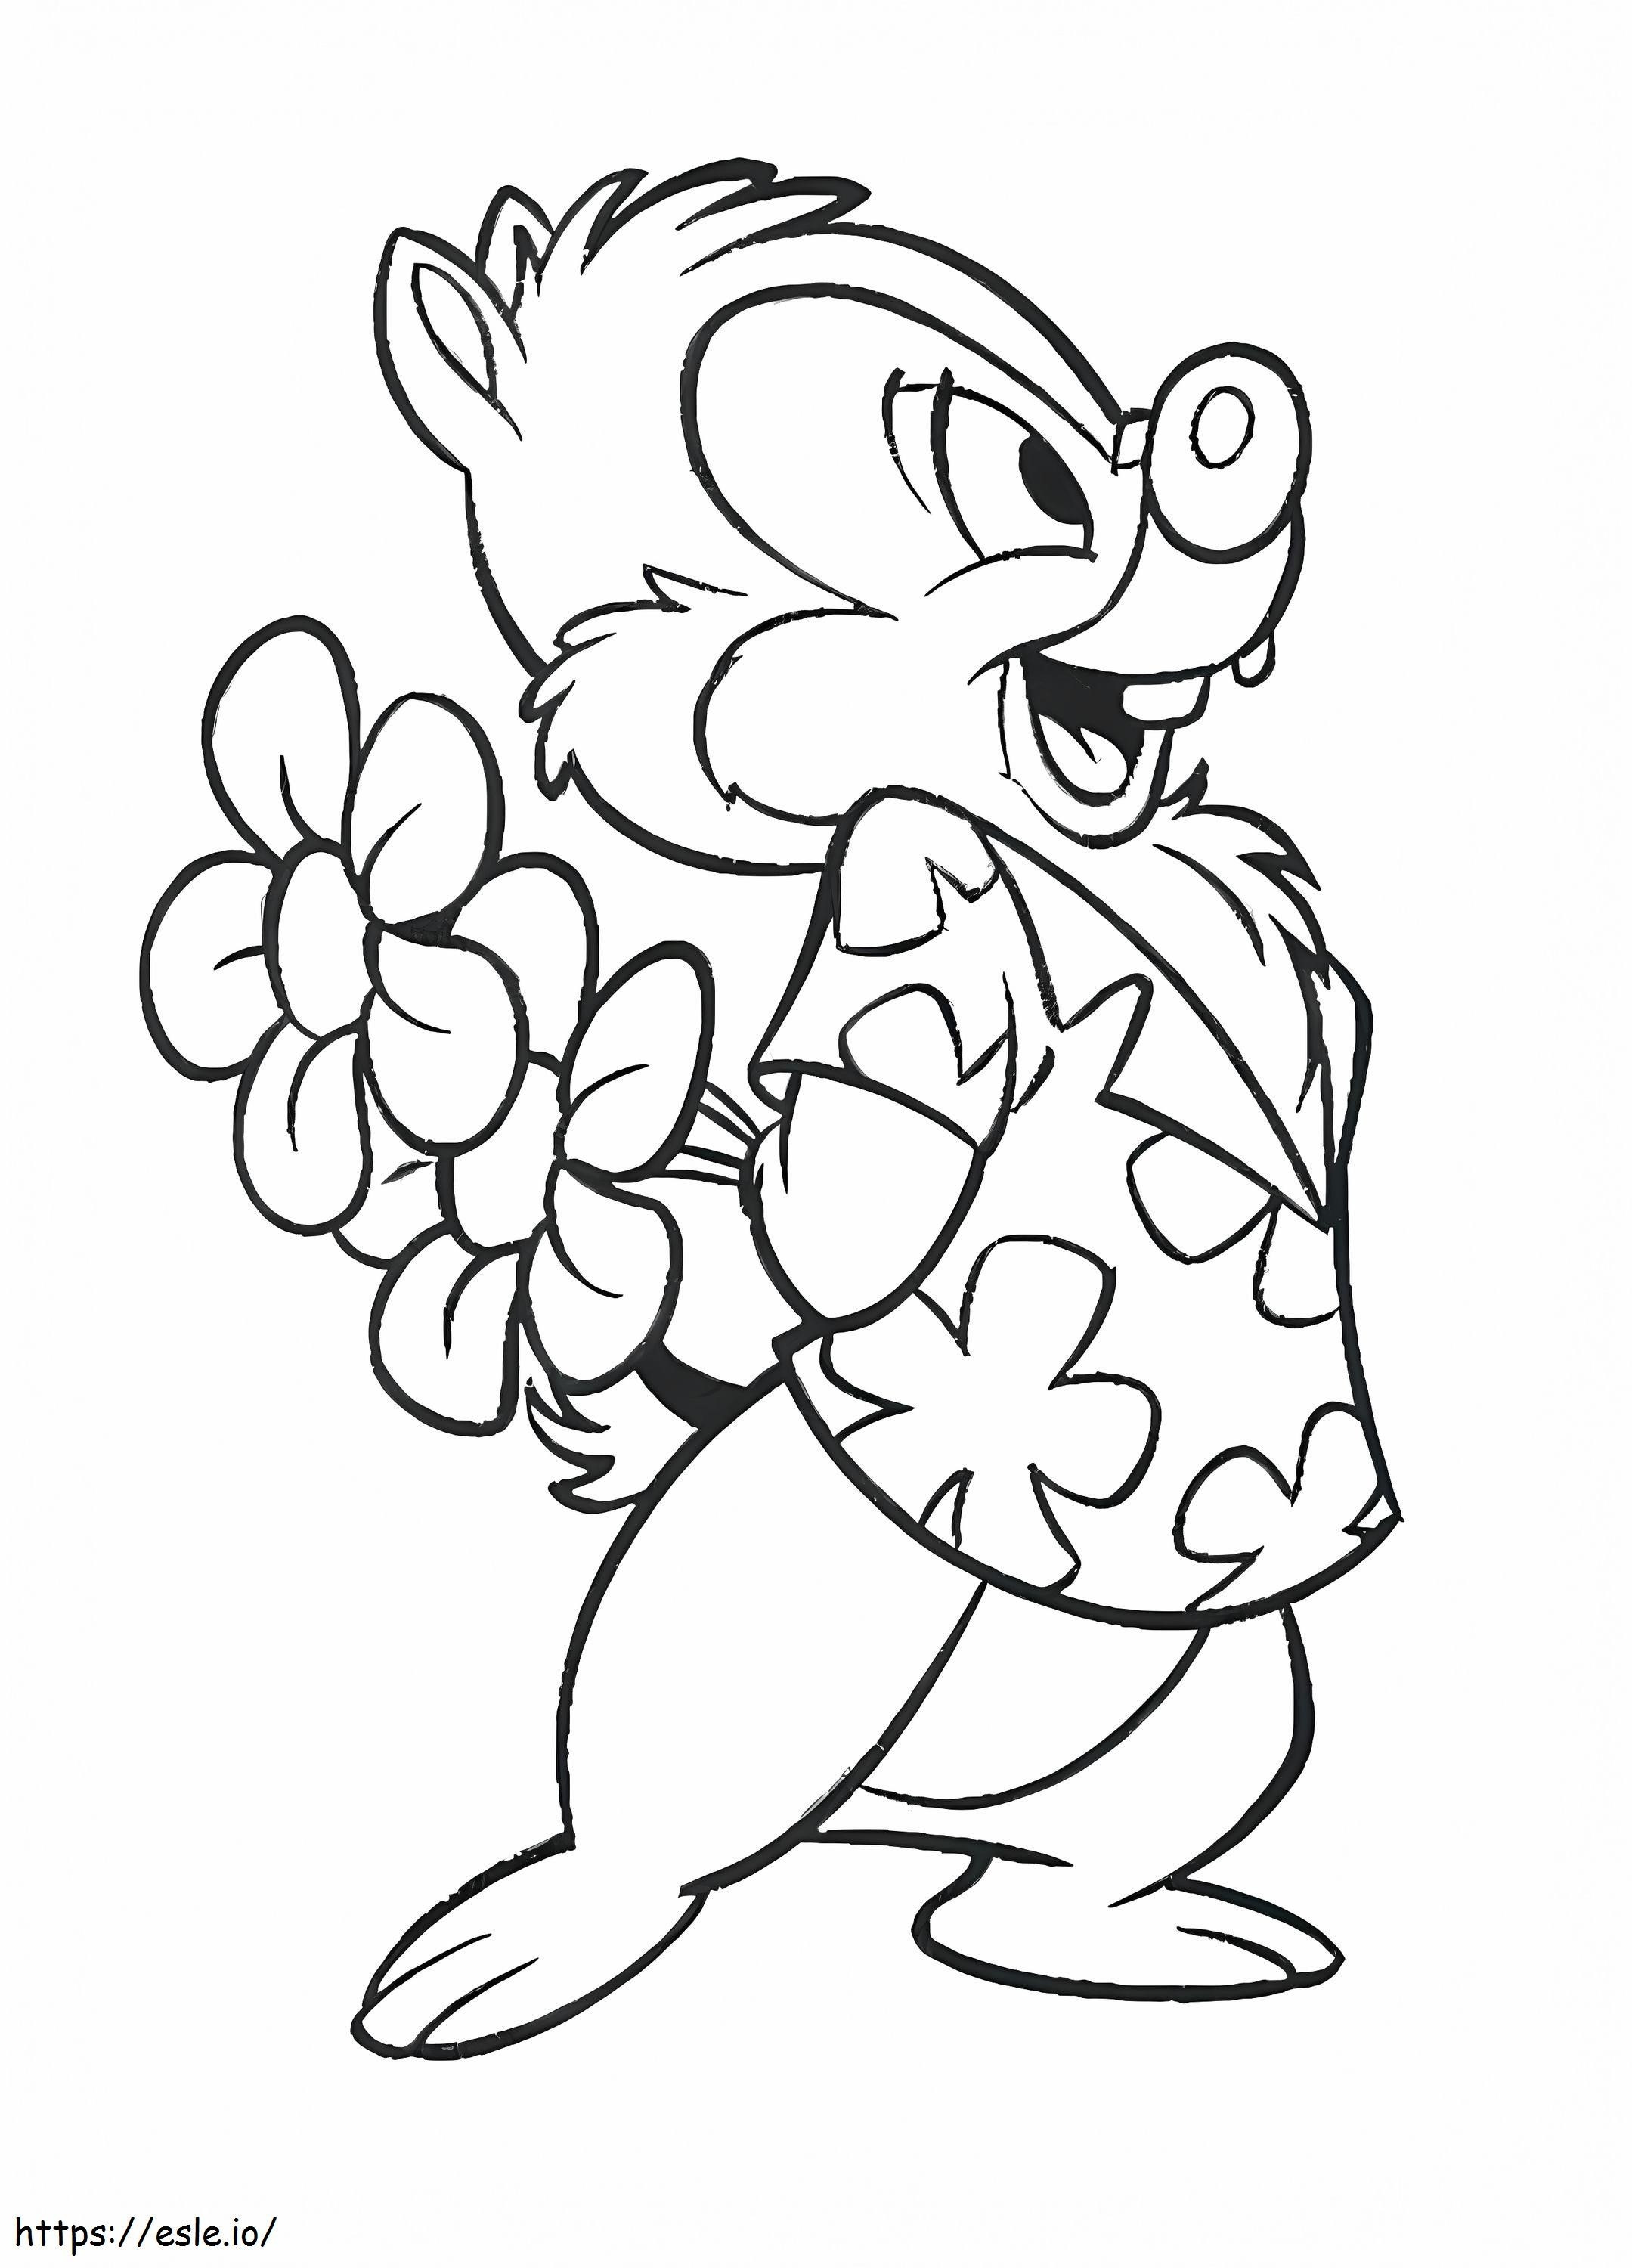 Dale With Flowers coloring page